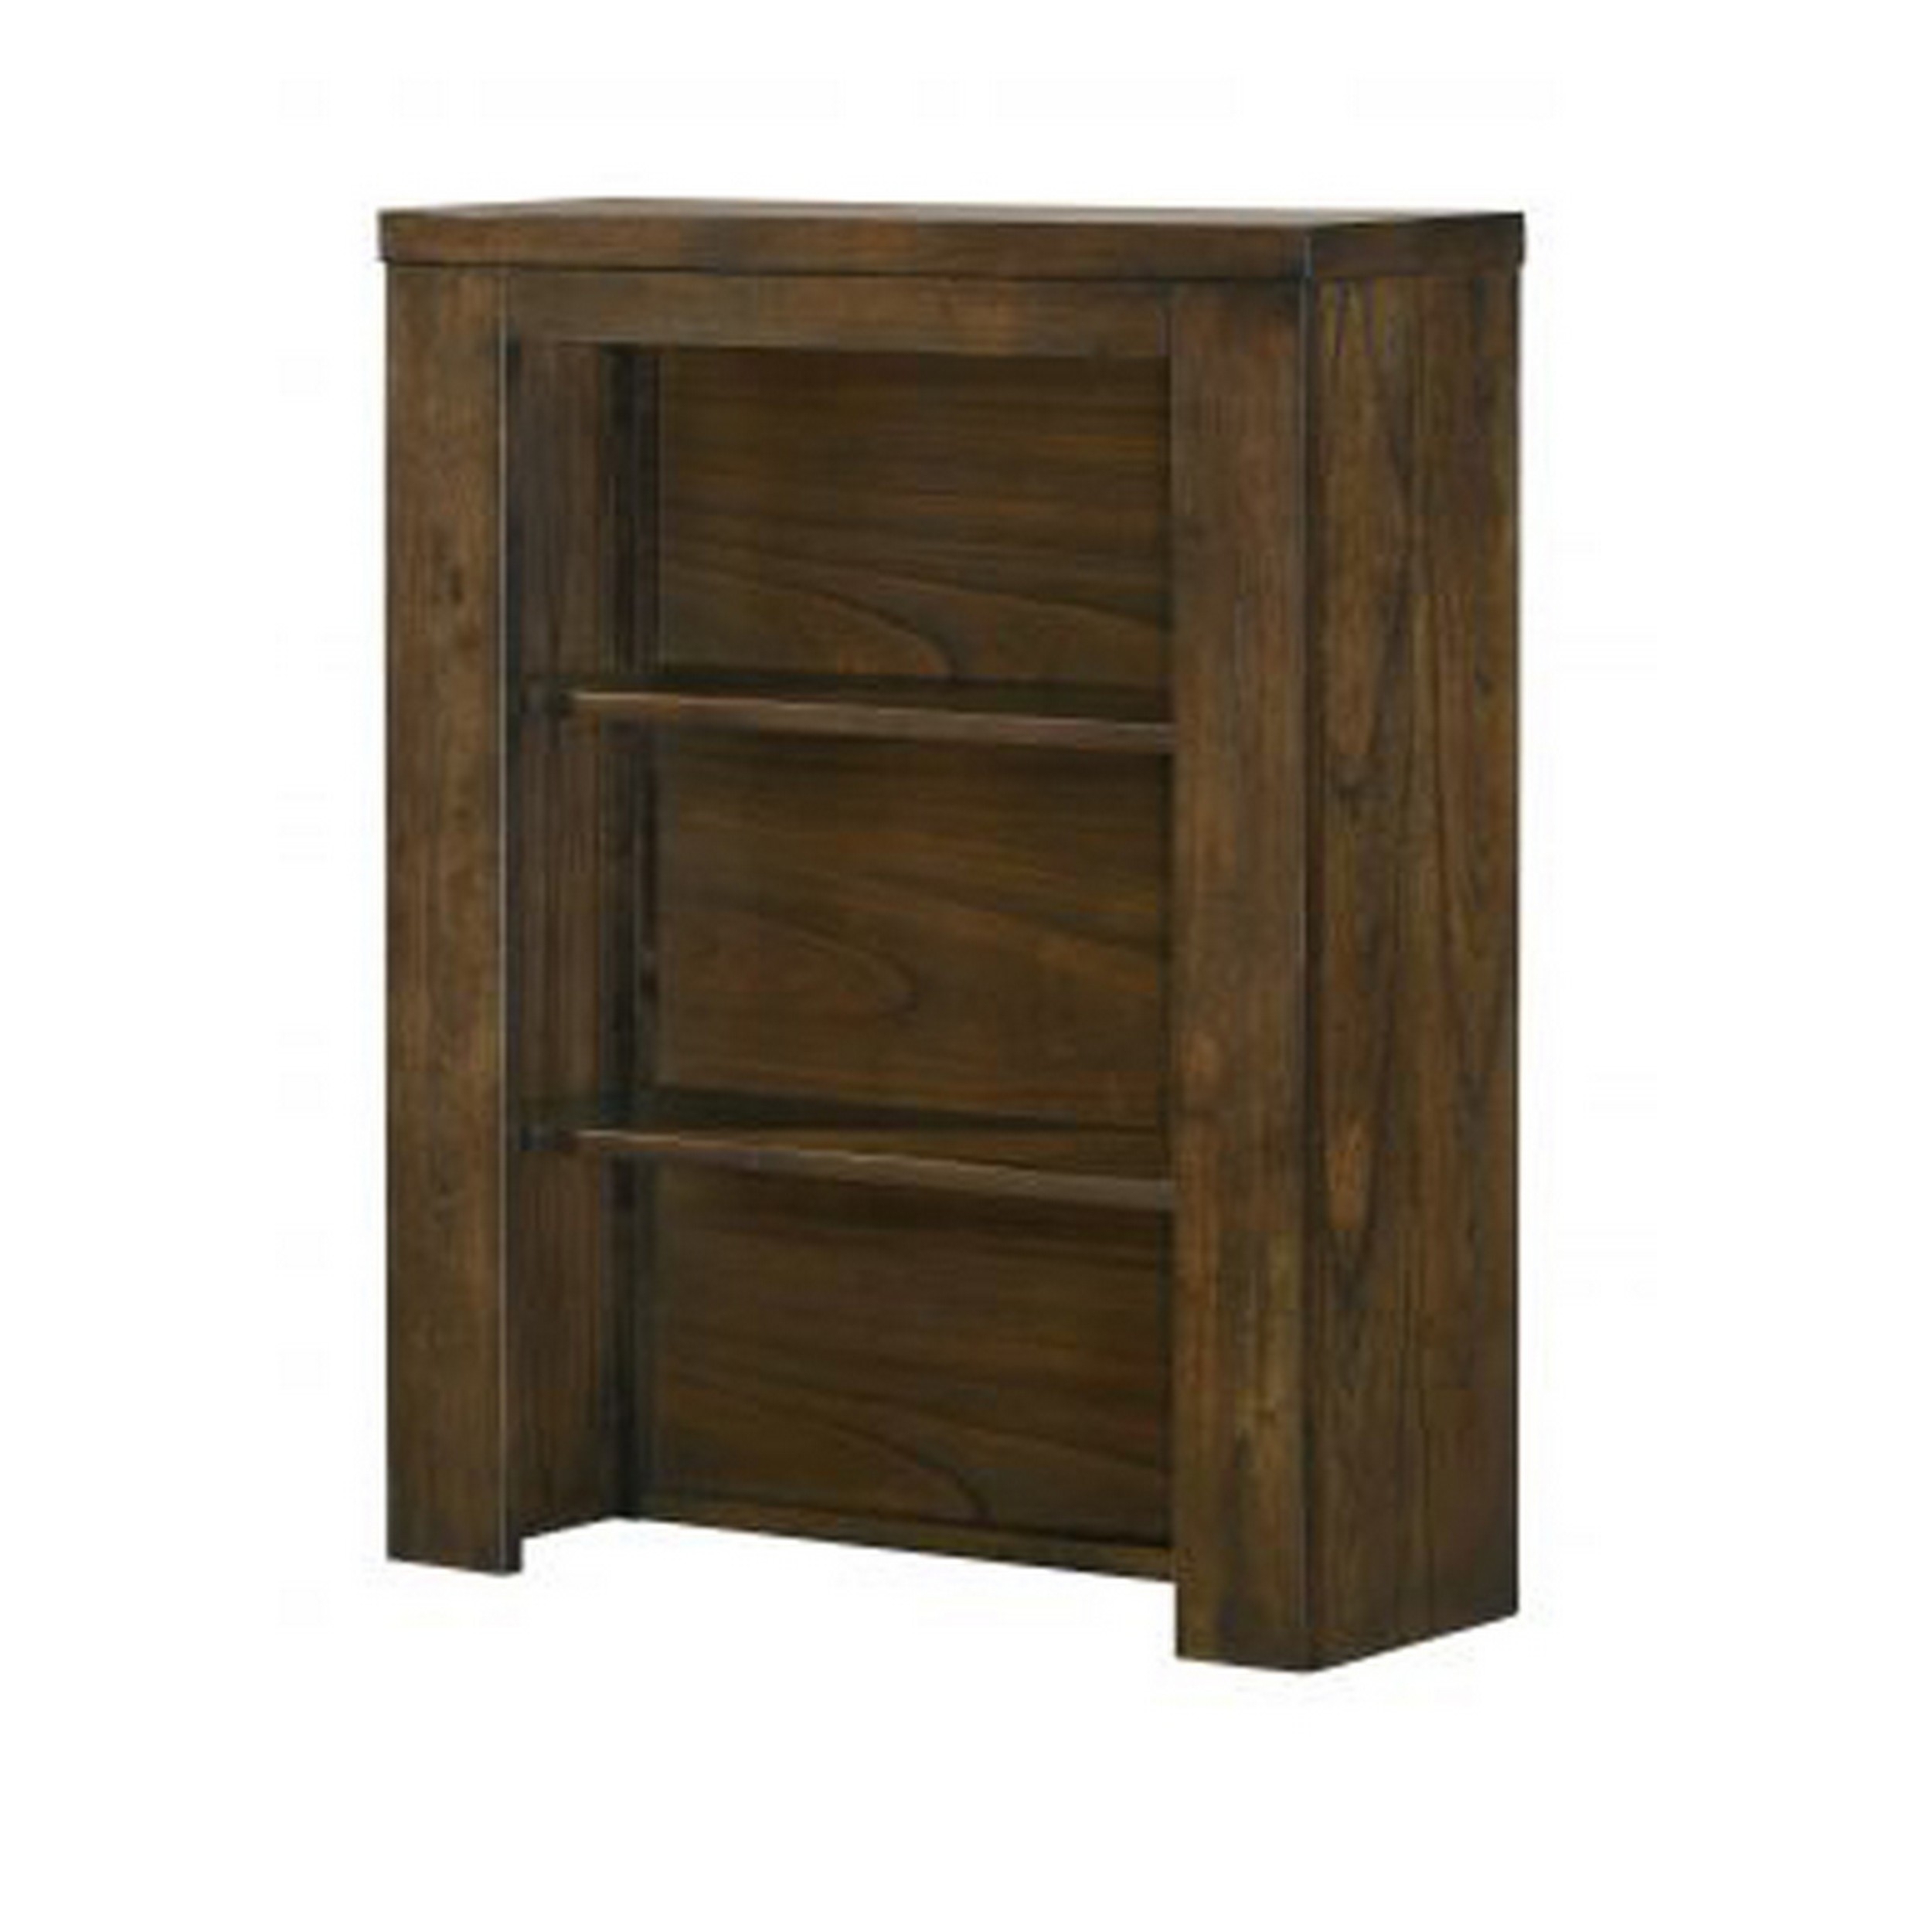 Maryl 26 Inch Pier Bookcase With 2 Shelves, Solid Wood, Antique Oak Brown - Saltoro Sherpi